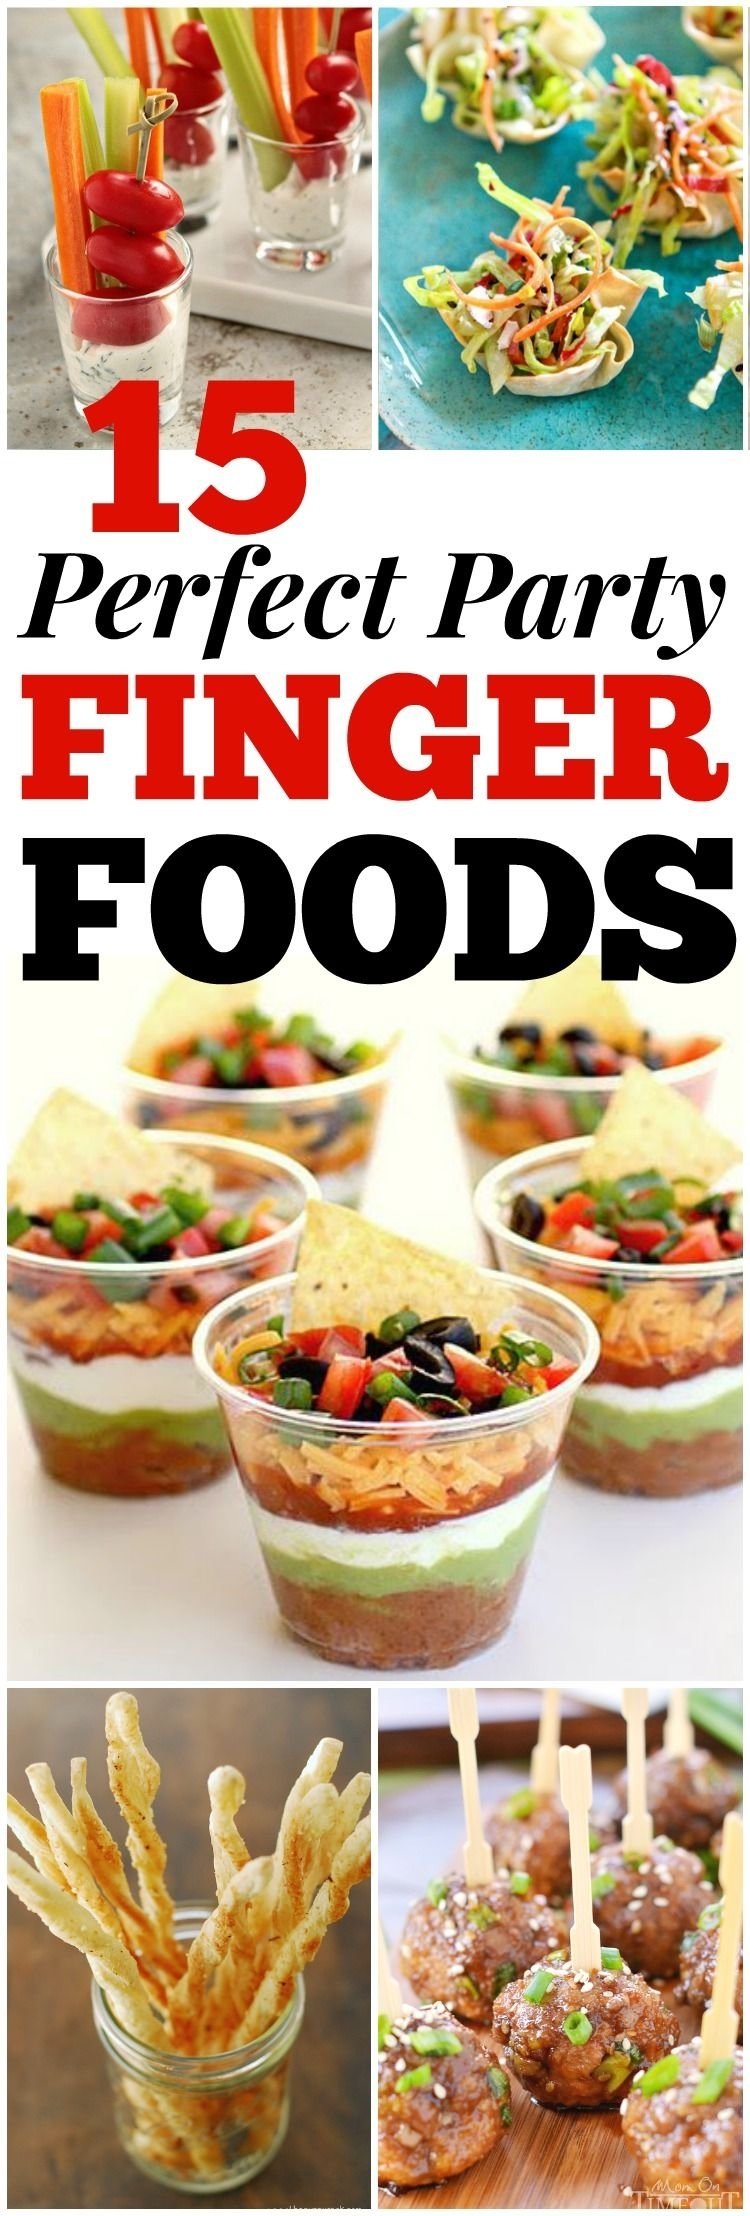 10 Amazing Finger Food Ideas For A Party 15 party finger foods party finger foods finger food recipes and 2022